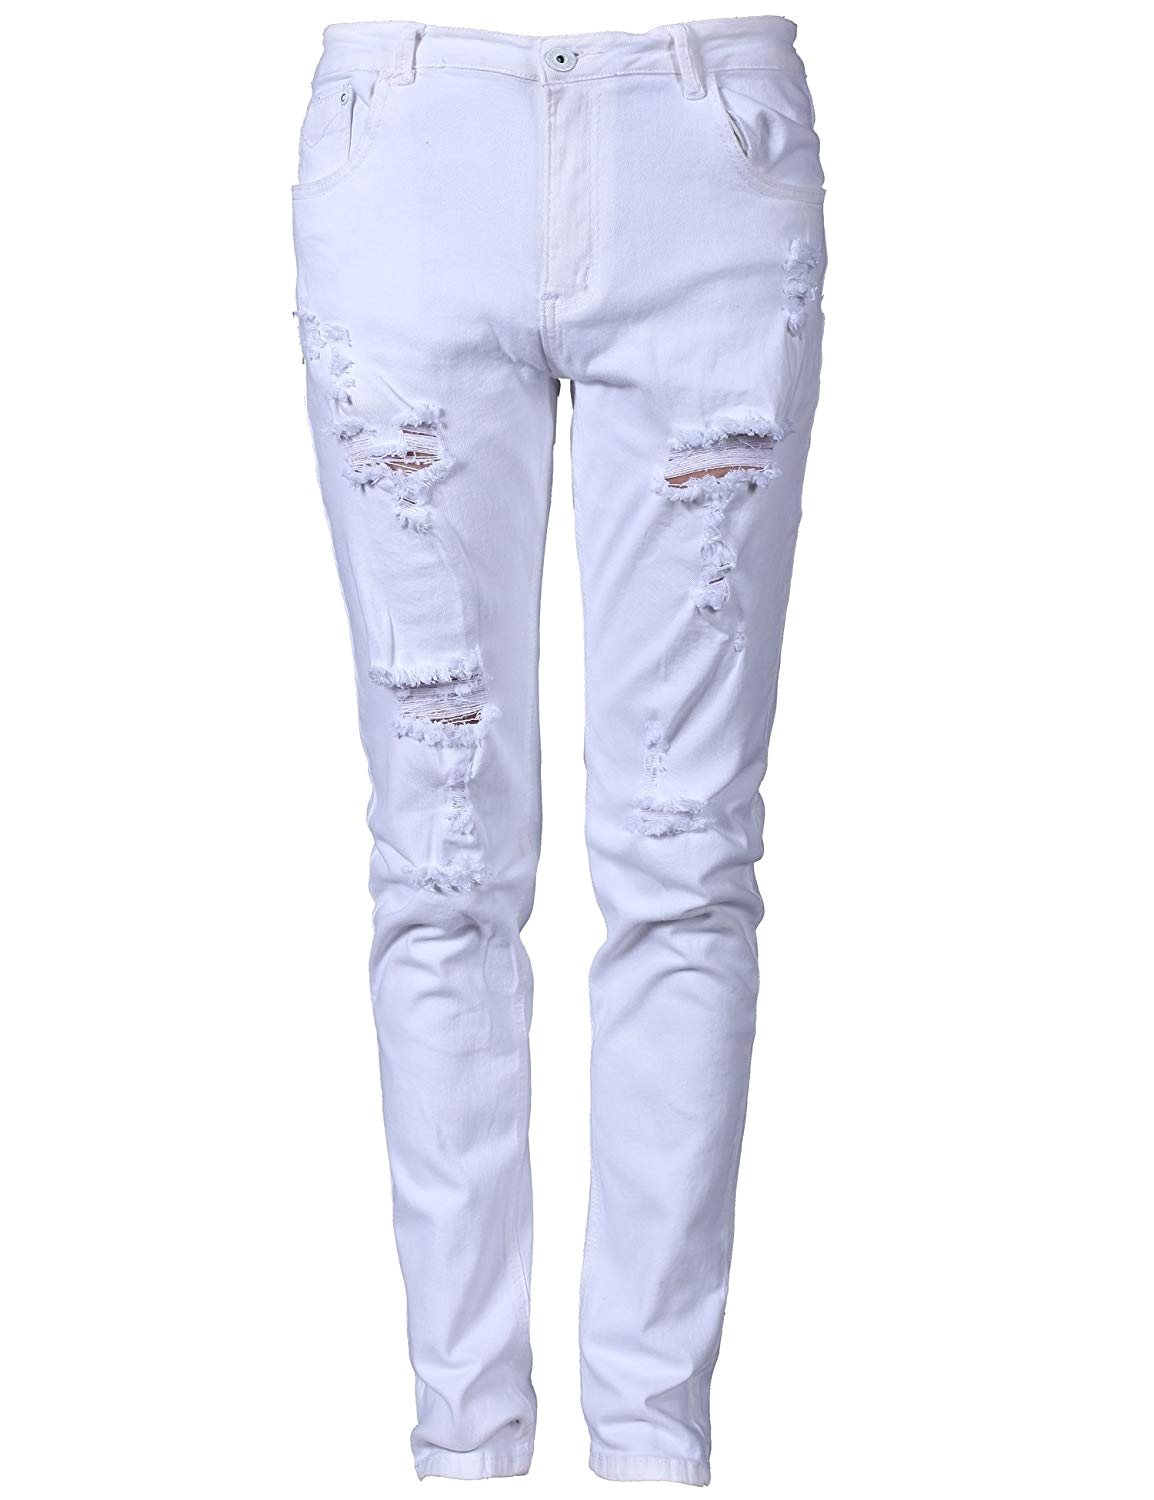 moonwalk mens elastic white ripped destroyed jeans with holes